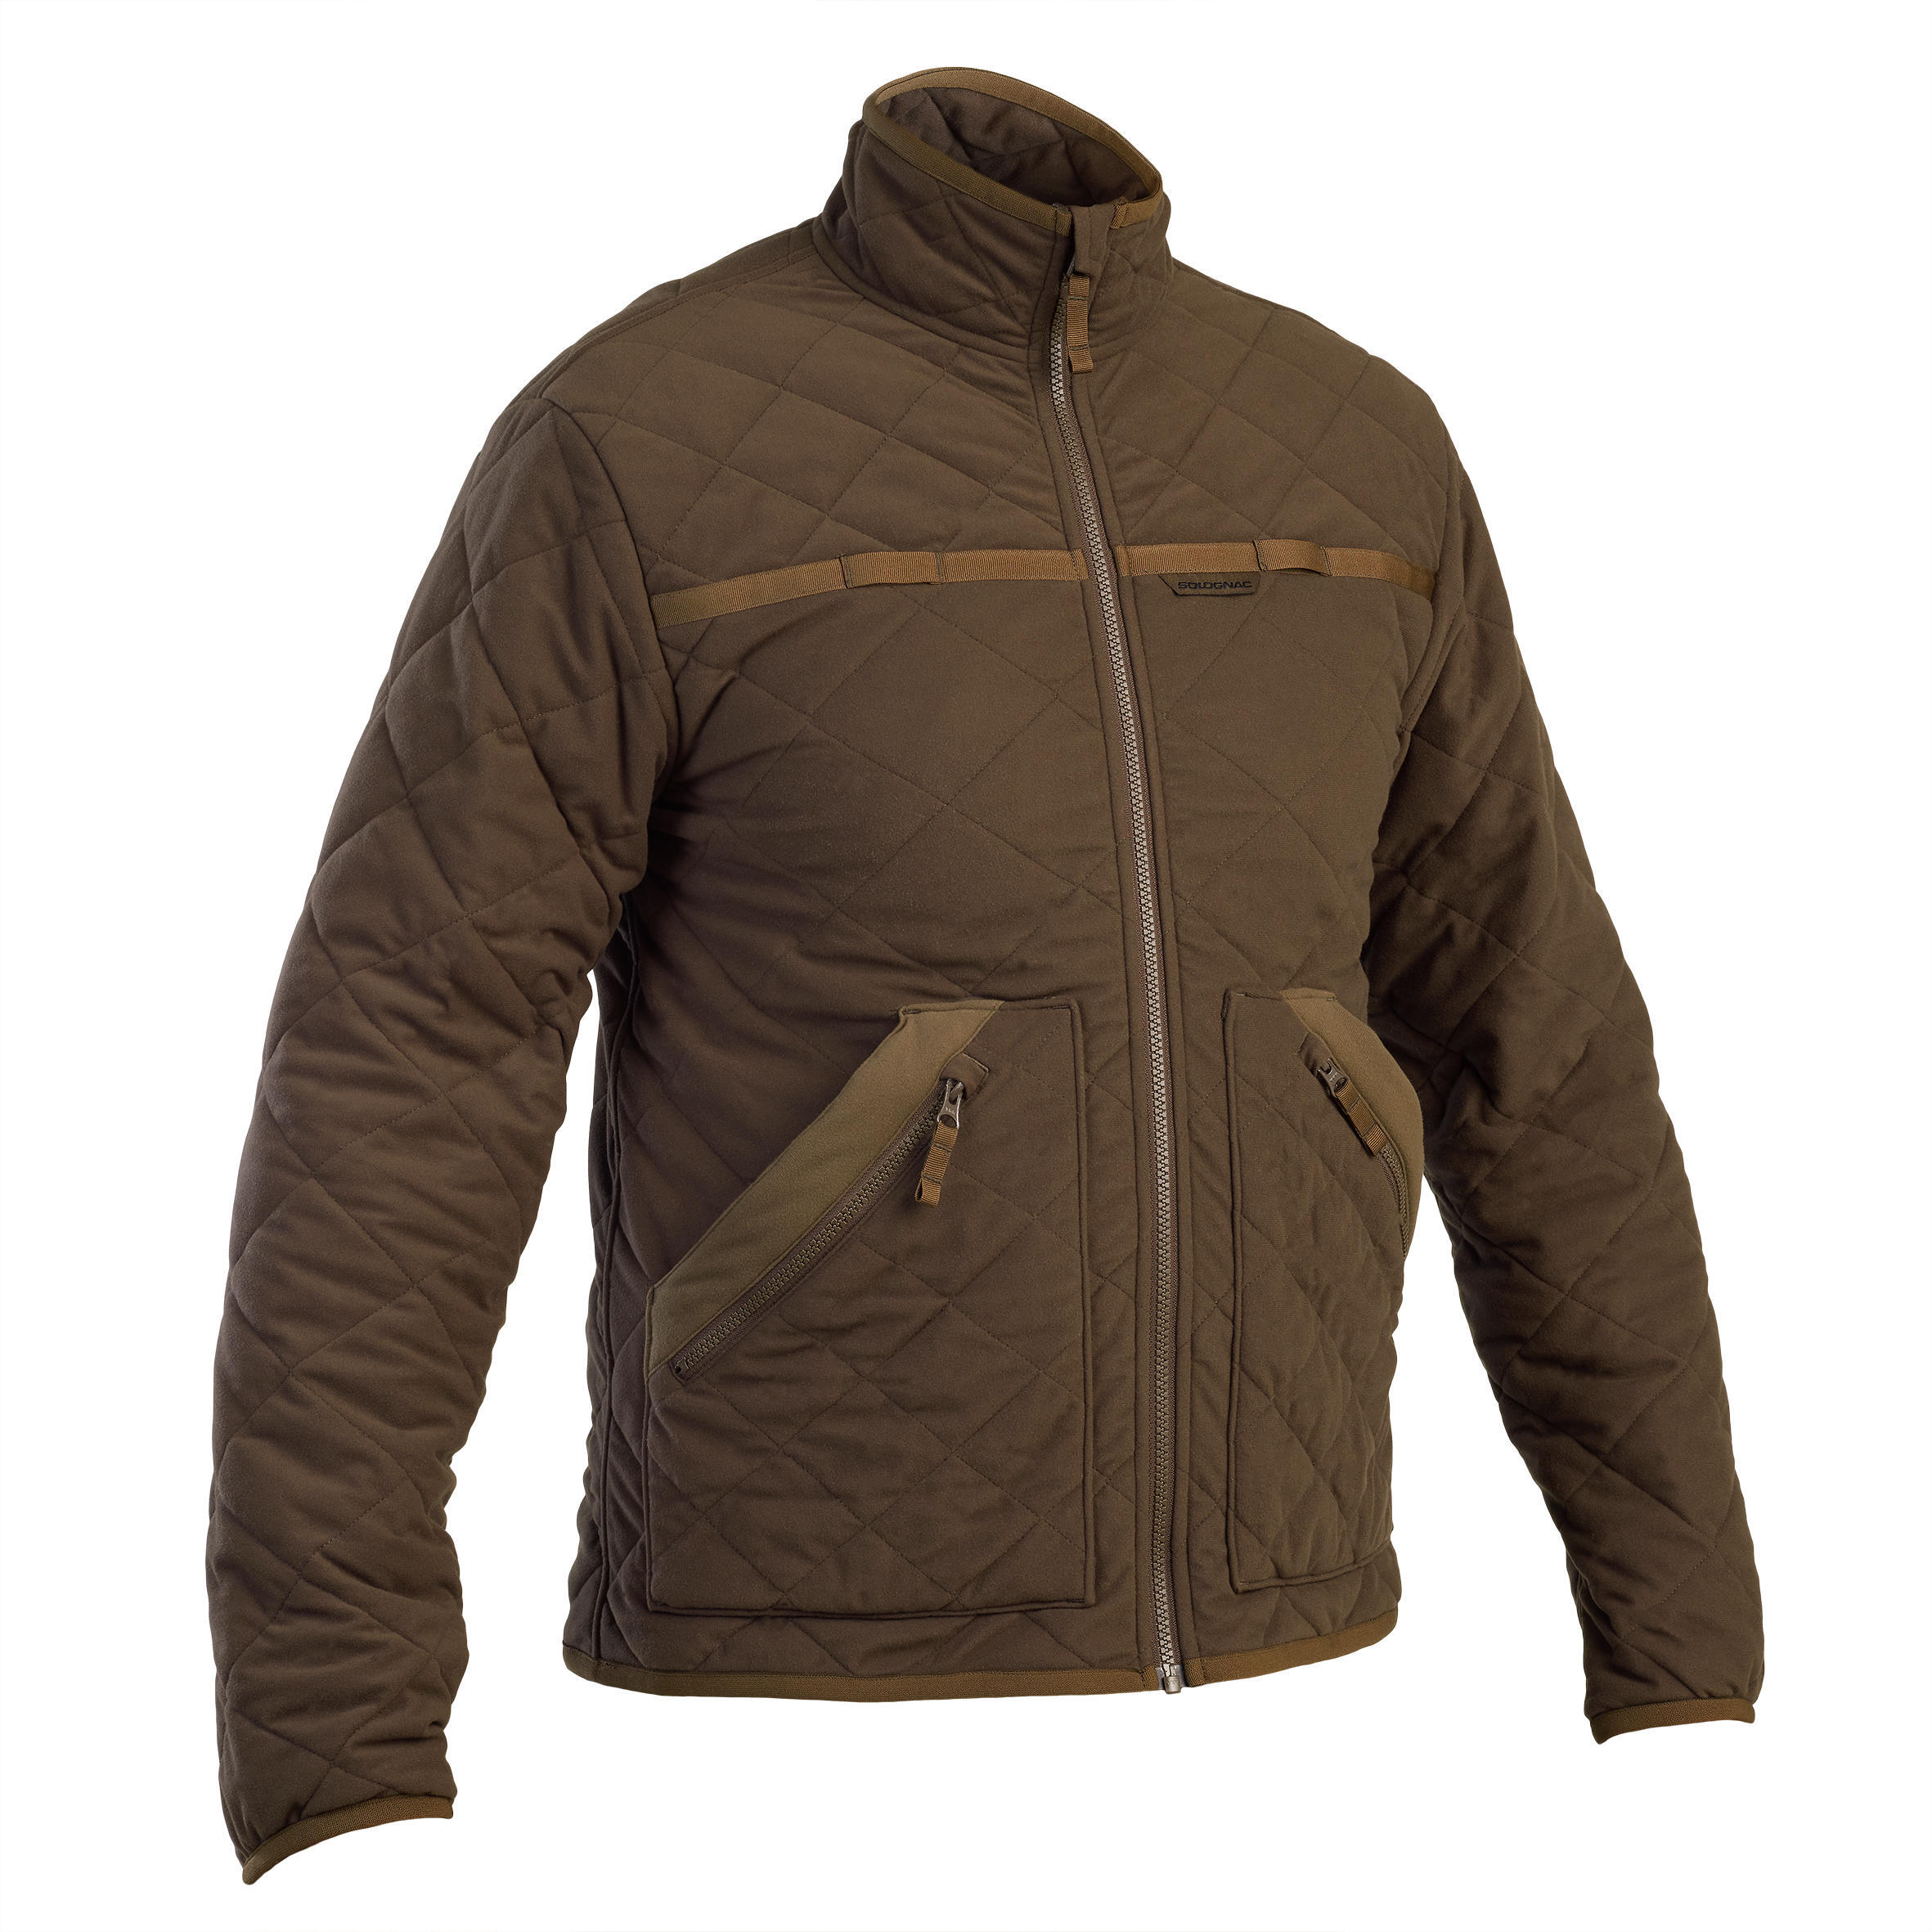 Silent padded jacket brown 500 1/3